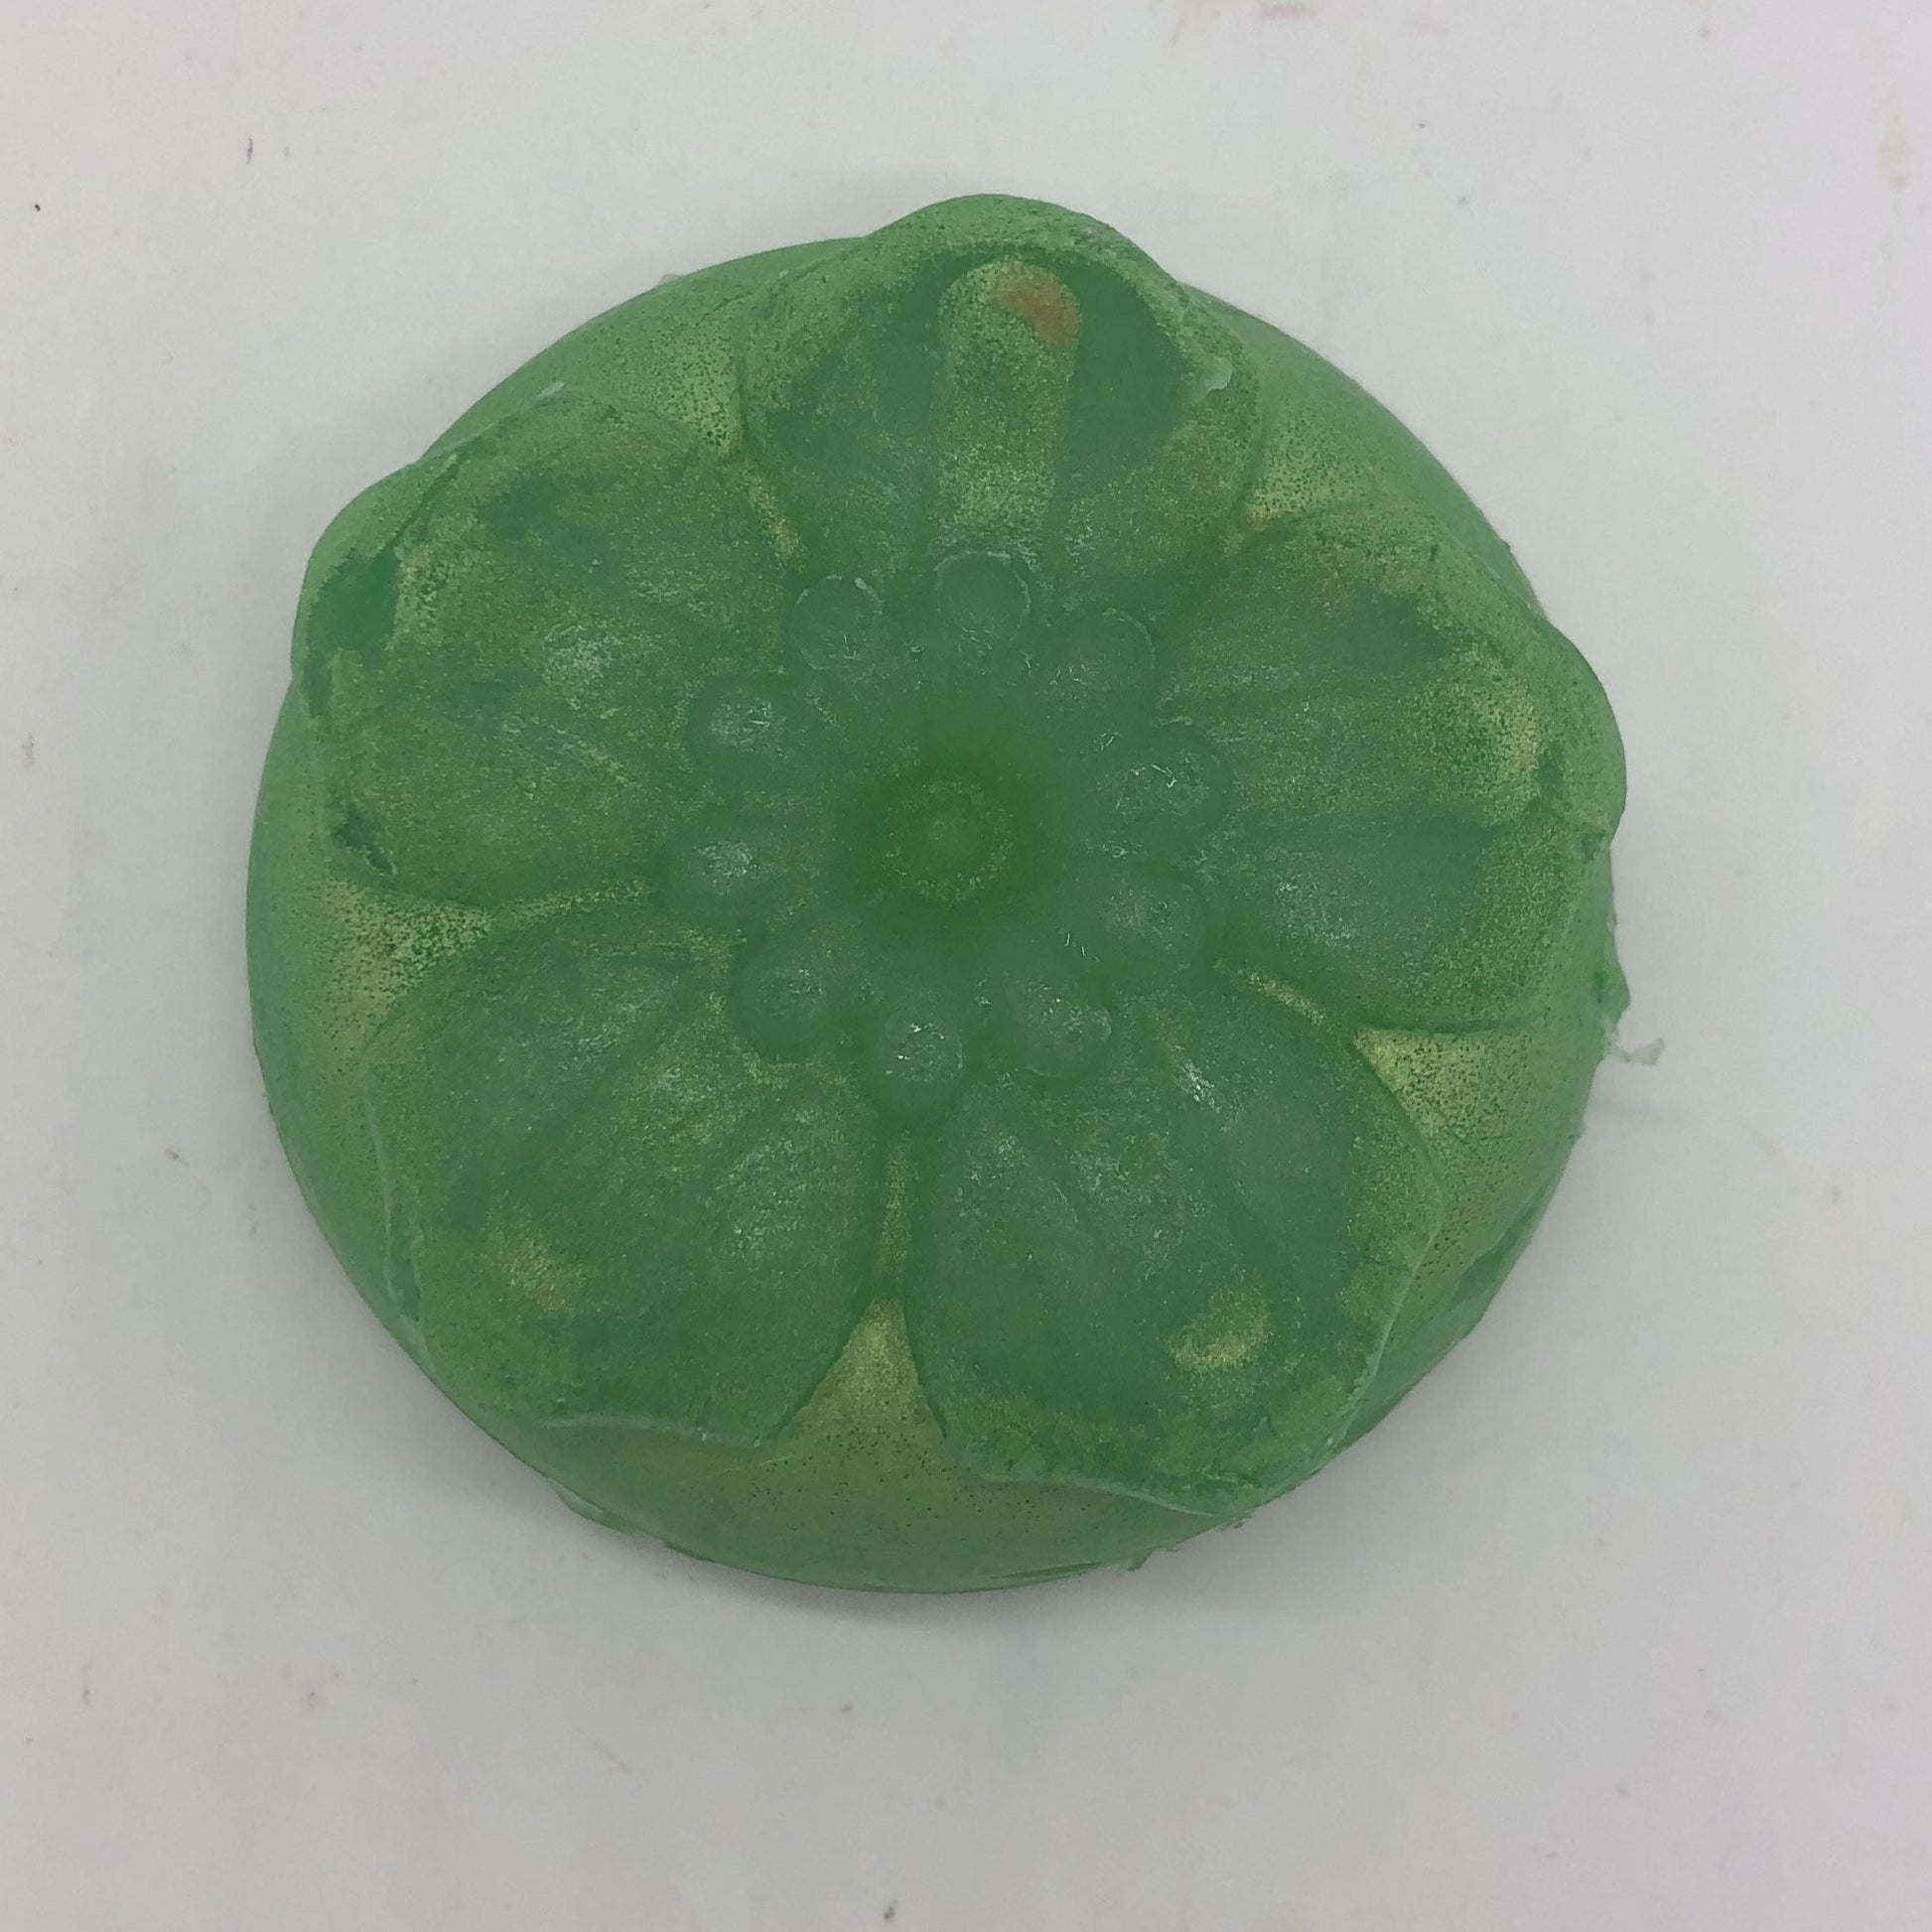 Solid green round floral soap